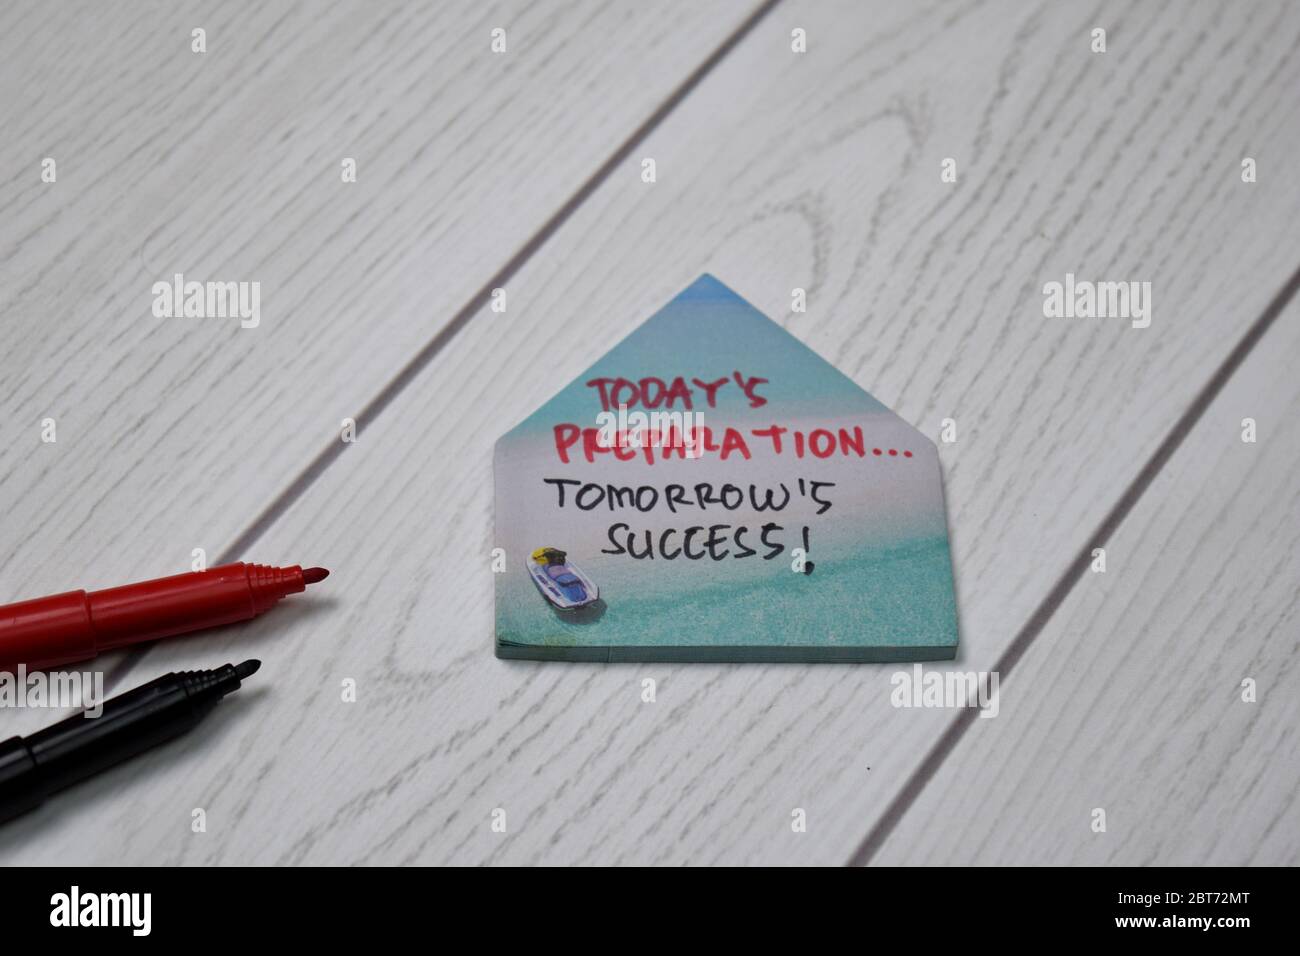 Today's Preparation, Tomorrow Success! write on sticky note isolated on wooden table. Stock Photo